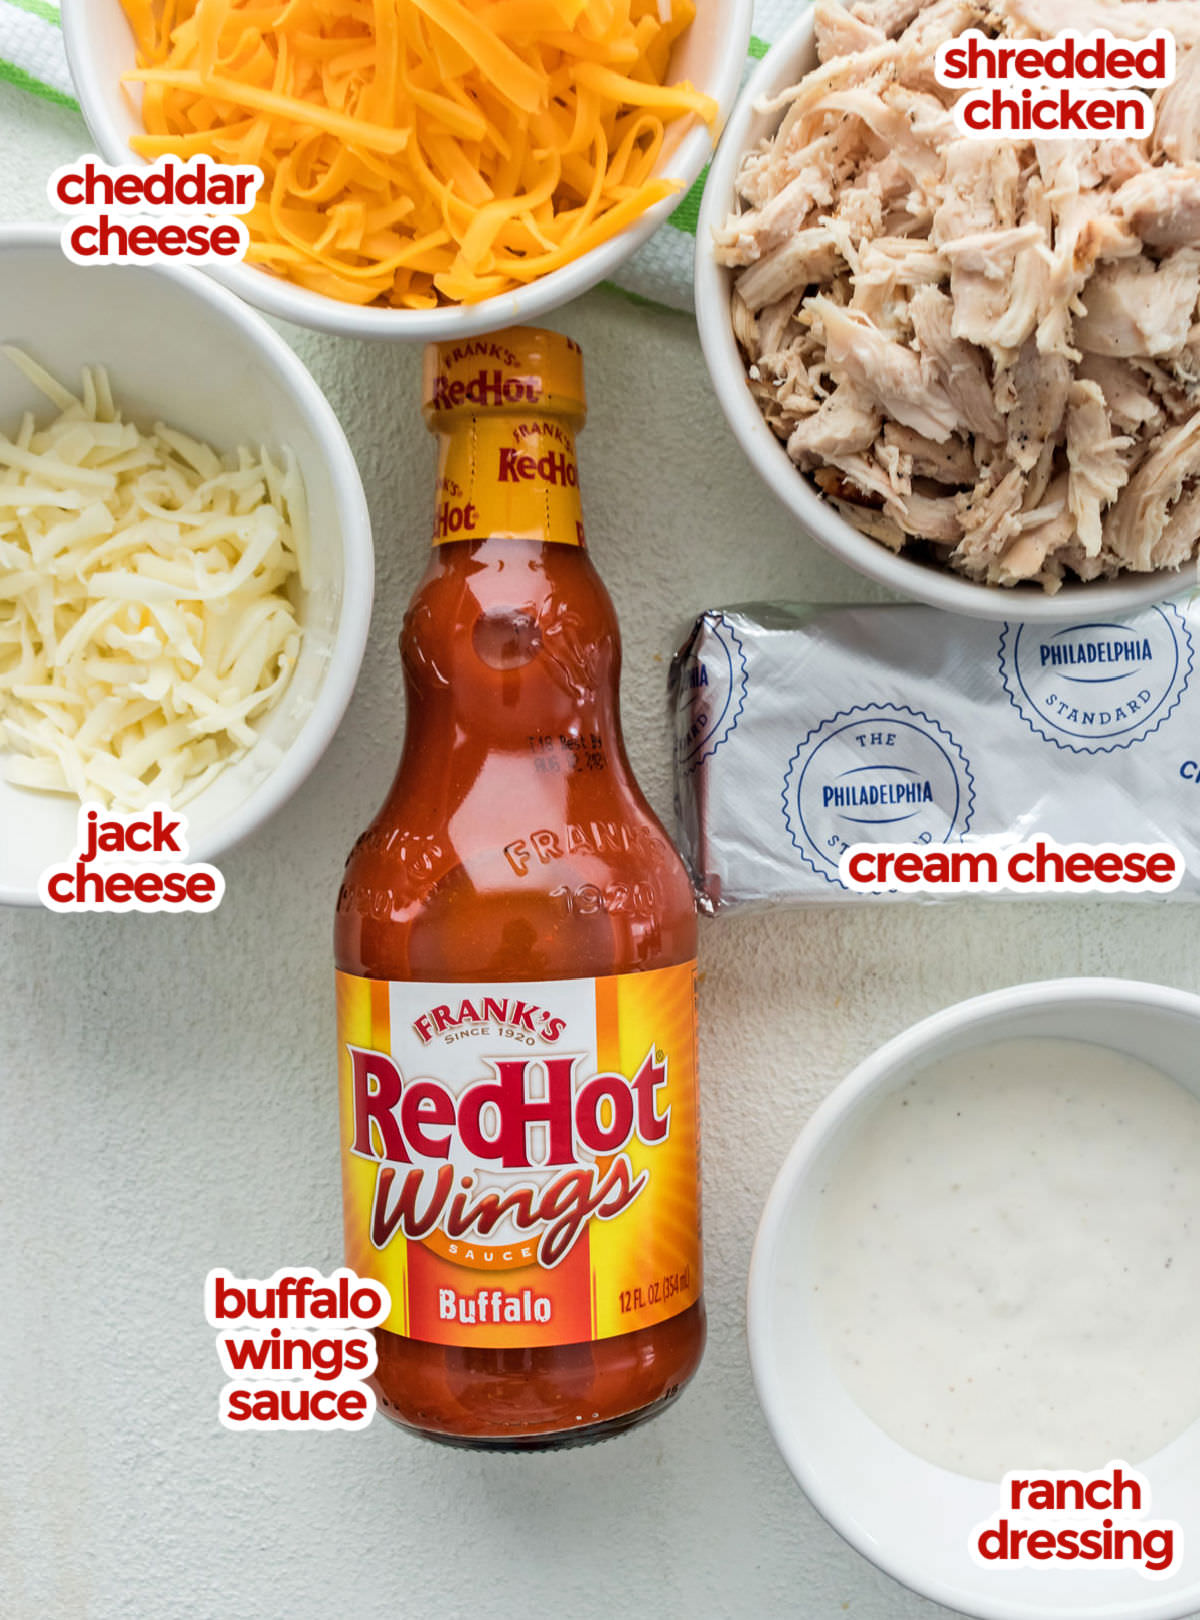 All the ingredients you will need to make Buffalo Chicken Dip including shredded chicken, cheddar cheese, jack cheese, cream cheese, ranch dressing and buffalo wings sauce.